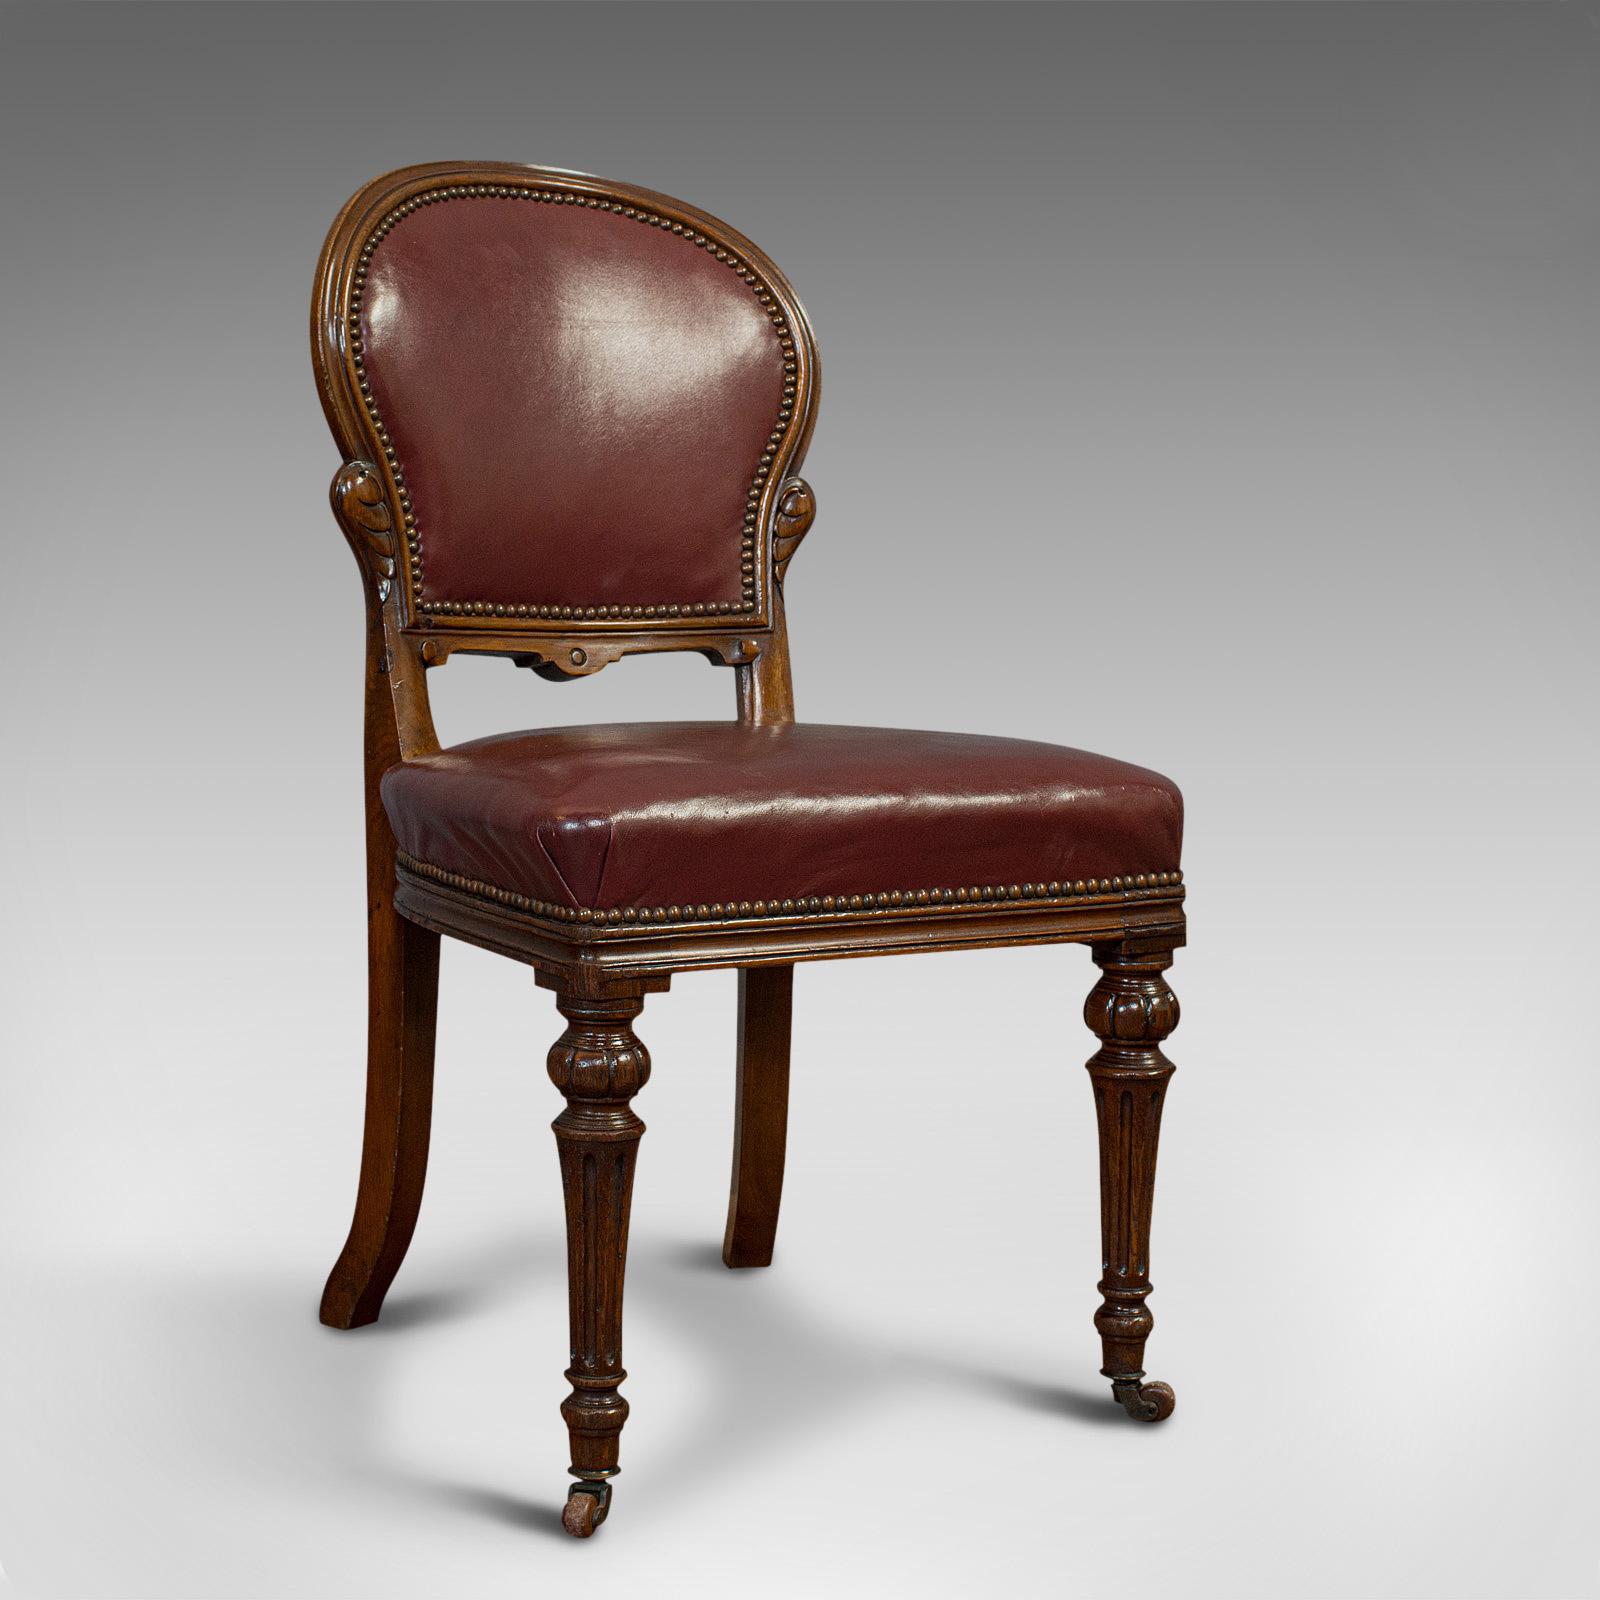 This is a pair of antique morning room chairs. An English, walnut and leather seat by Doveston, Bird & Hull of Manchester, dating to the early Victorian period, circa 1860.

Superb antique chairs
Displaying a desirable aged patina
Quality walnut